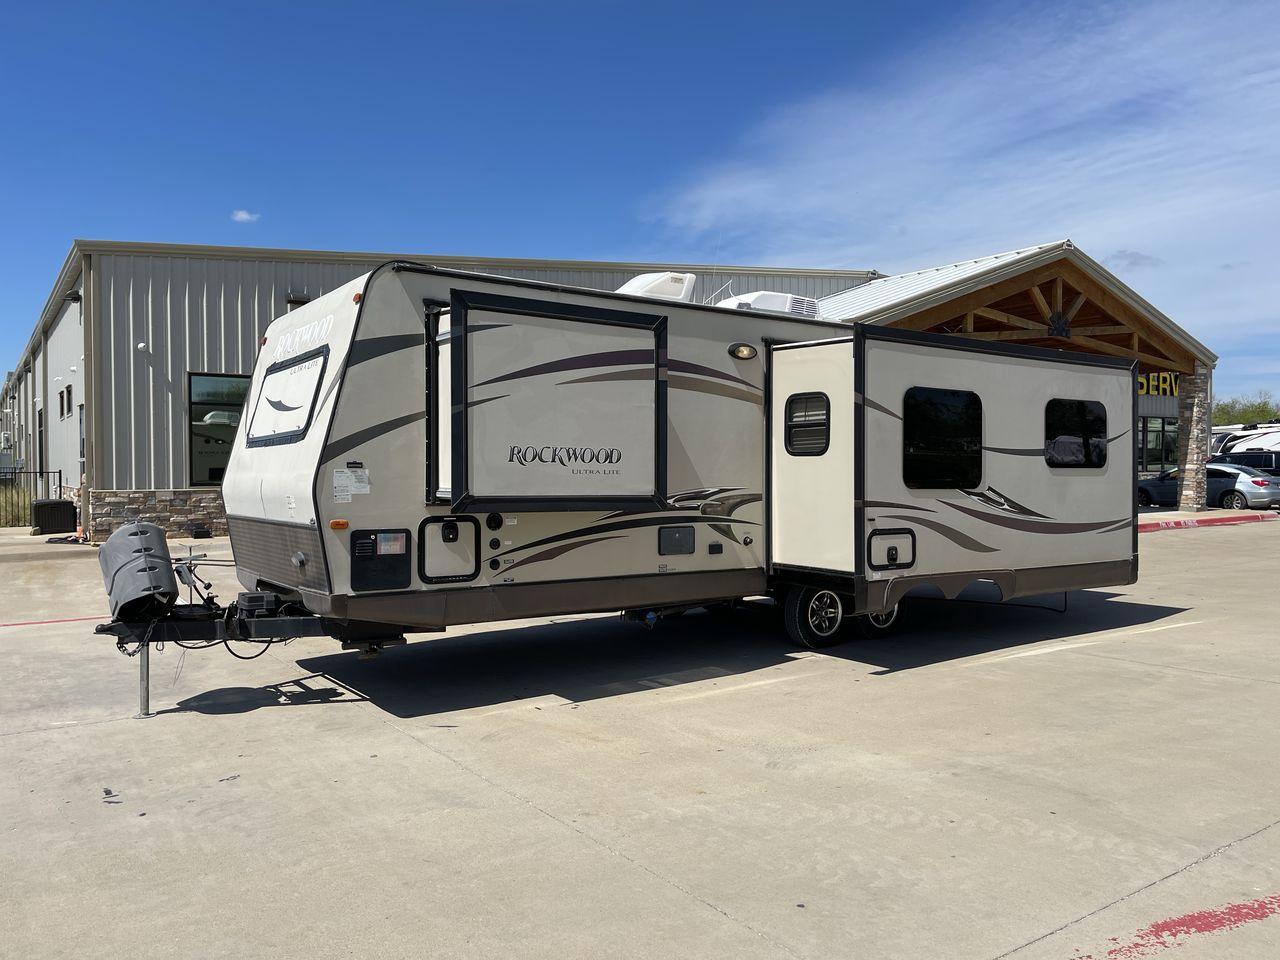 2014 FOREST RIVER ROCKWOOD 2604WS (4X4TRLB26ED) , Length: 29.67 ft. | Dry Weight: 5,665 lbs. | Slides: 2 transmission, located at 4319 N Main Street, Cleburne, TX, 76033, (817) 221-0660, 32.435829, -97.384178 - Looking for a lightweight, fully-equipped travel trailer under 30 feet? Check out this 2014 Forest River Rockwood 2604WS! This trailer measures exactly 29.67 ft. in length and 9.58 ft. in height. It has a dry weight of 5,665 lbs. and a manageable hitch weight of 711 lbs. It includes two slides and a - Photo #24